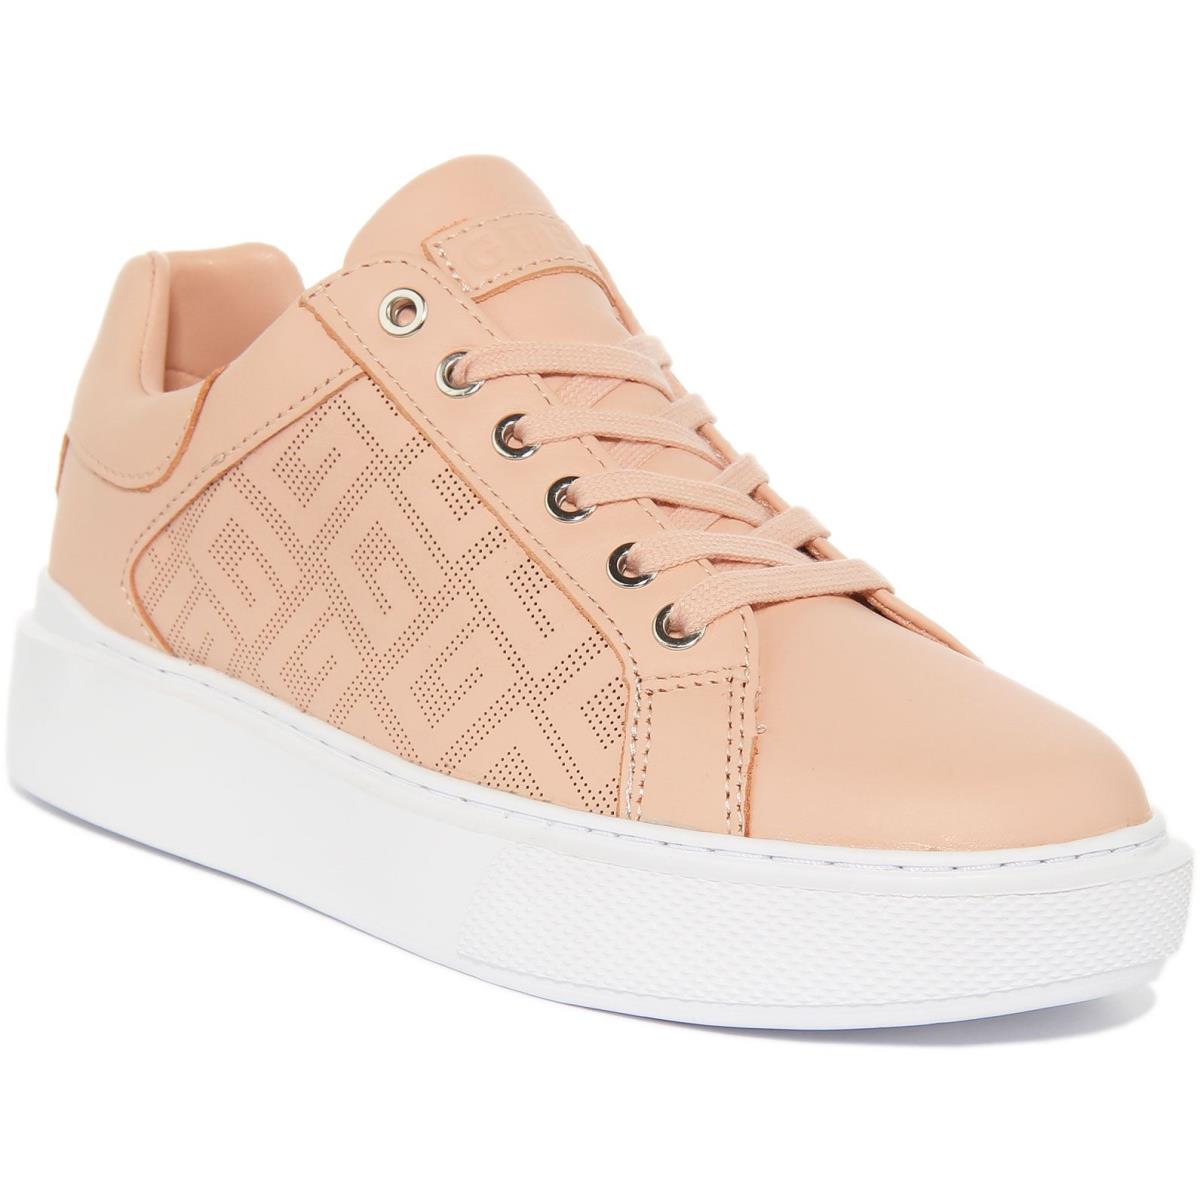 Guess Fl5Iveele12 Ivee Womens Lace Up Casual Leather Sneakers Size US 5 - 11 PINK